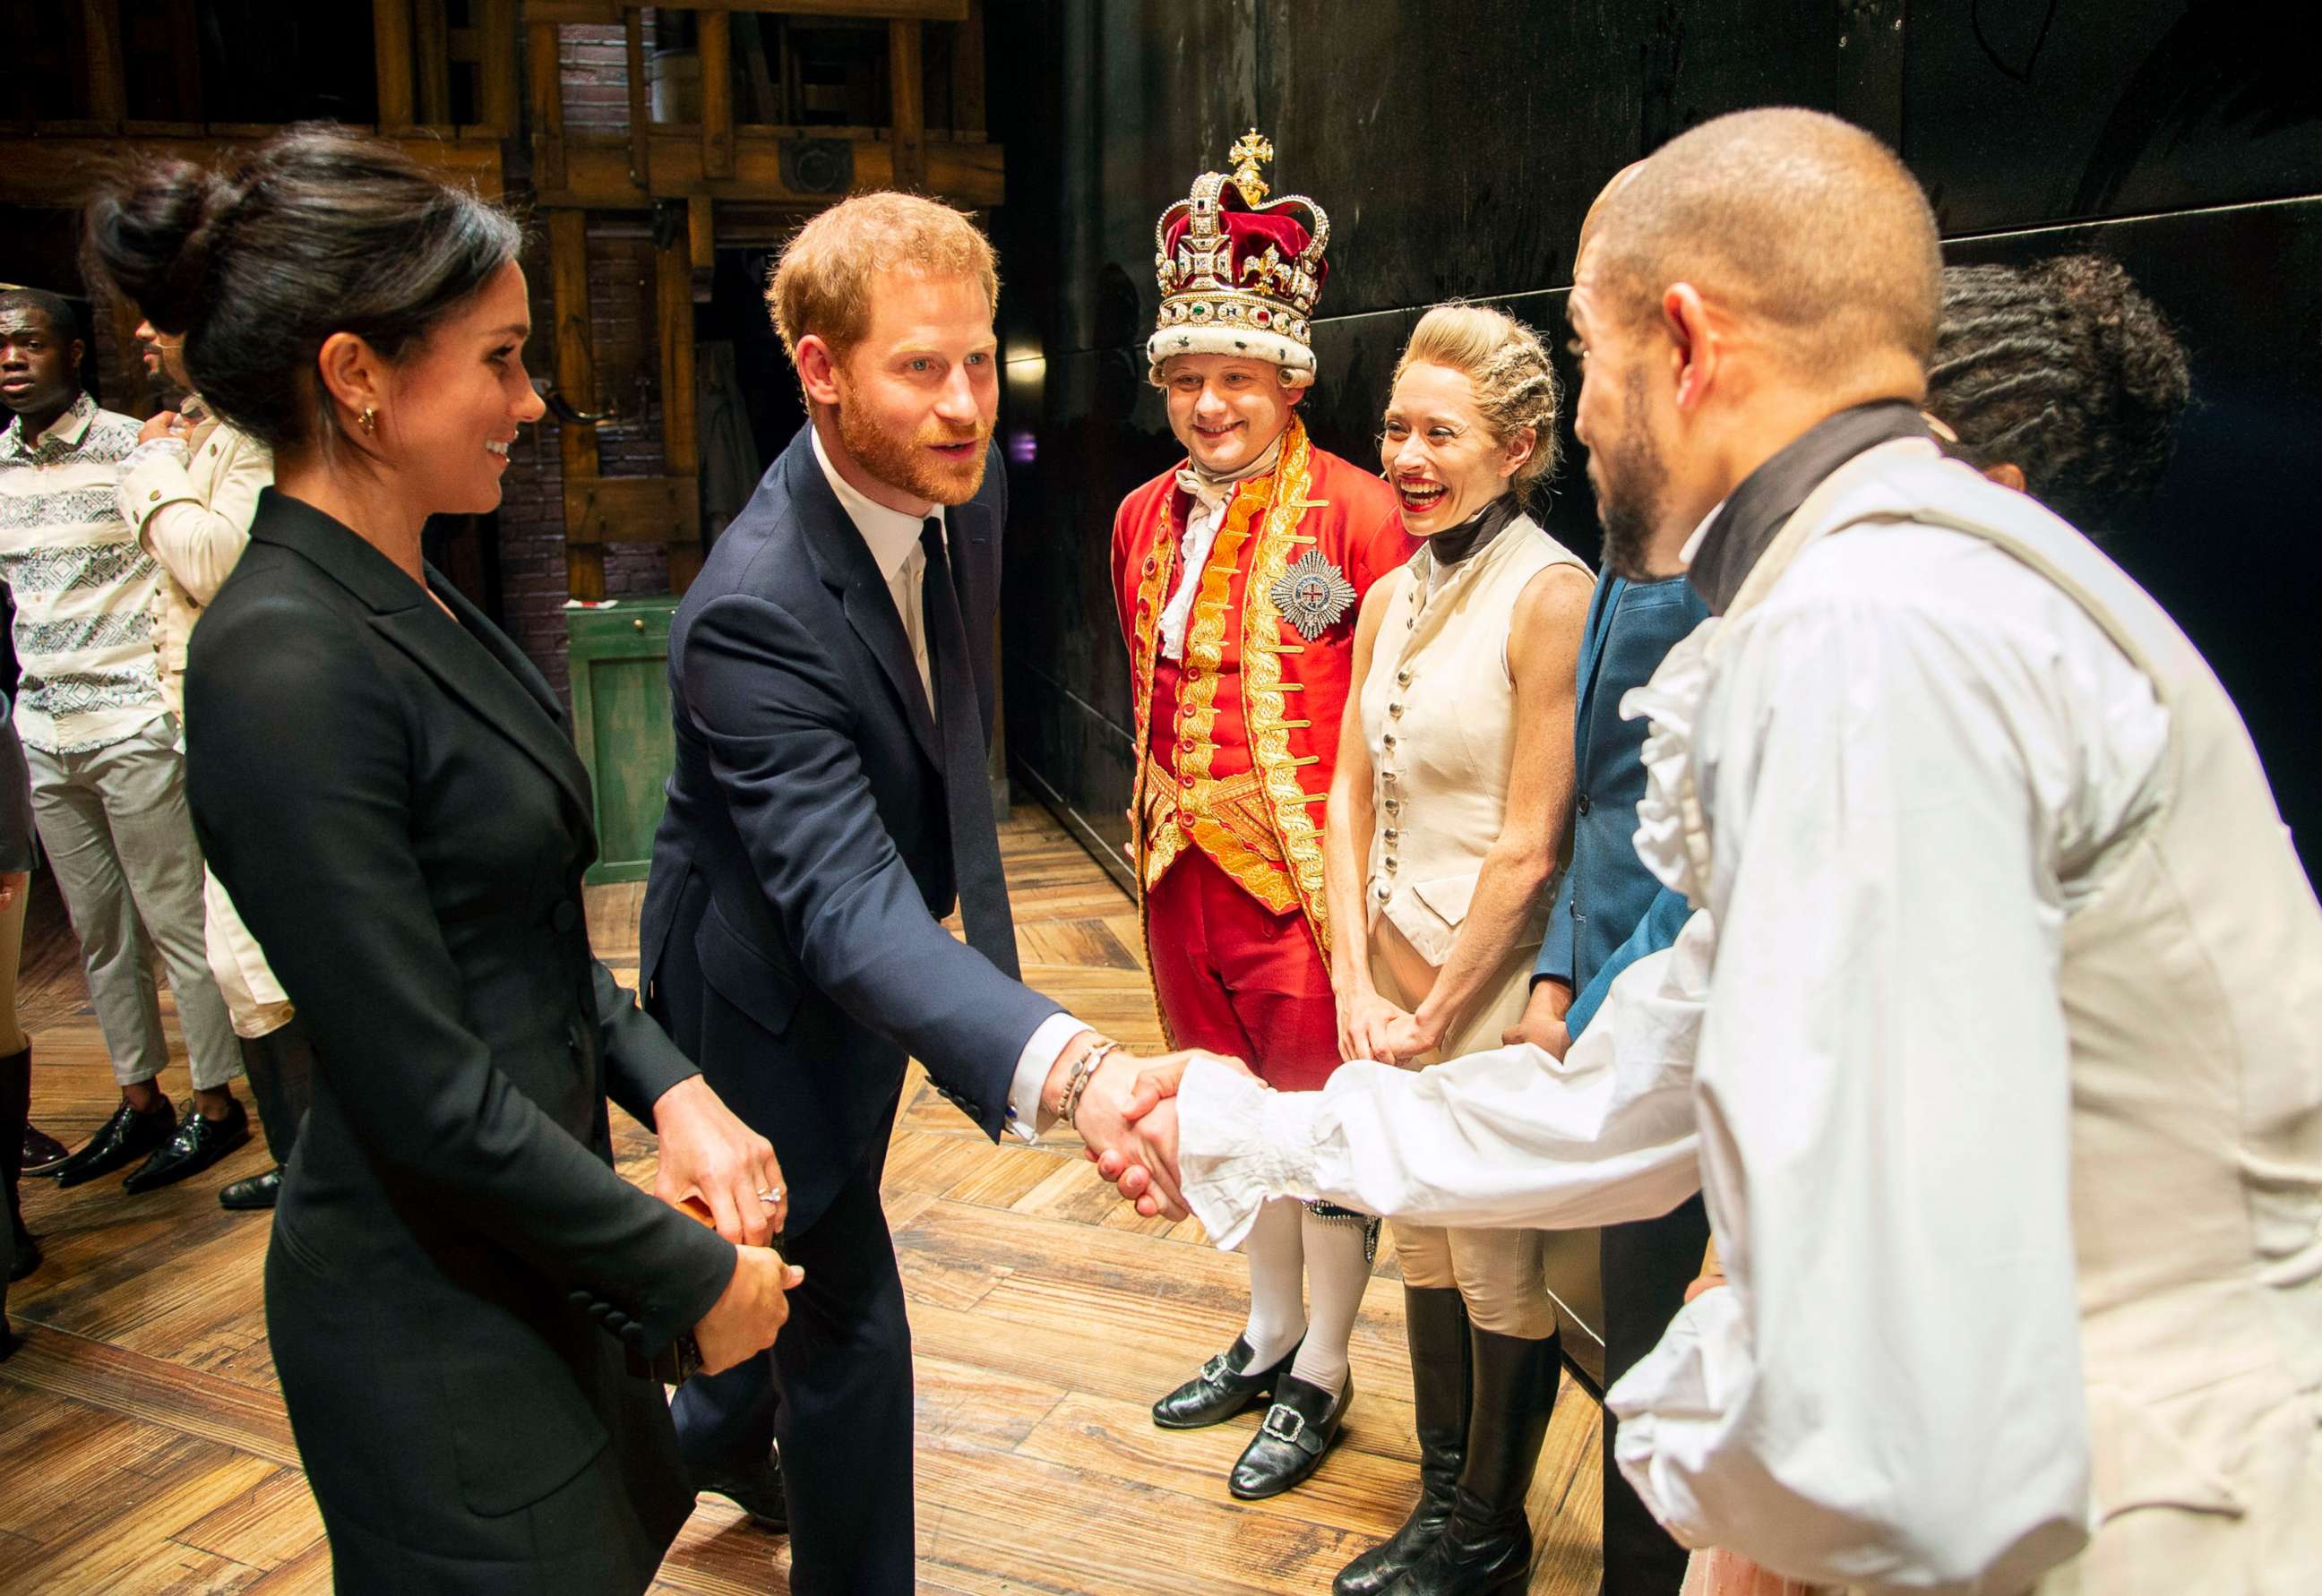 PHOTO: Prince Harry and Duchess Meghan Markle of Sussex after the performance meeting cast and crew backstage at the Victoria Palace Theatre, London, Aug. 30, 2018.